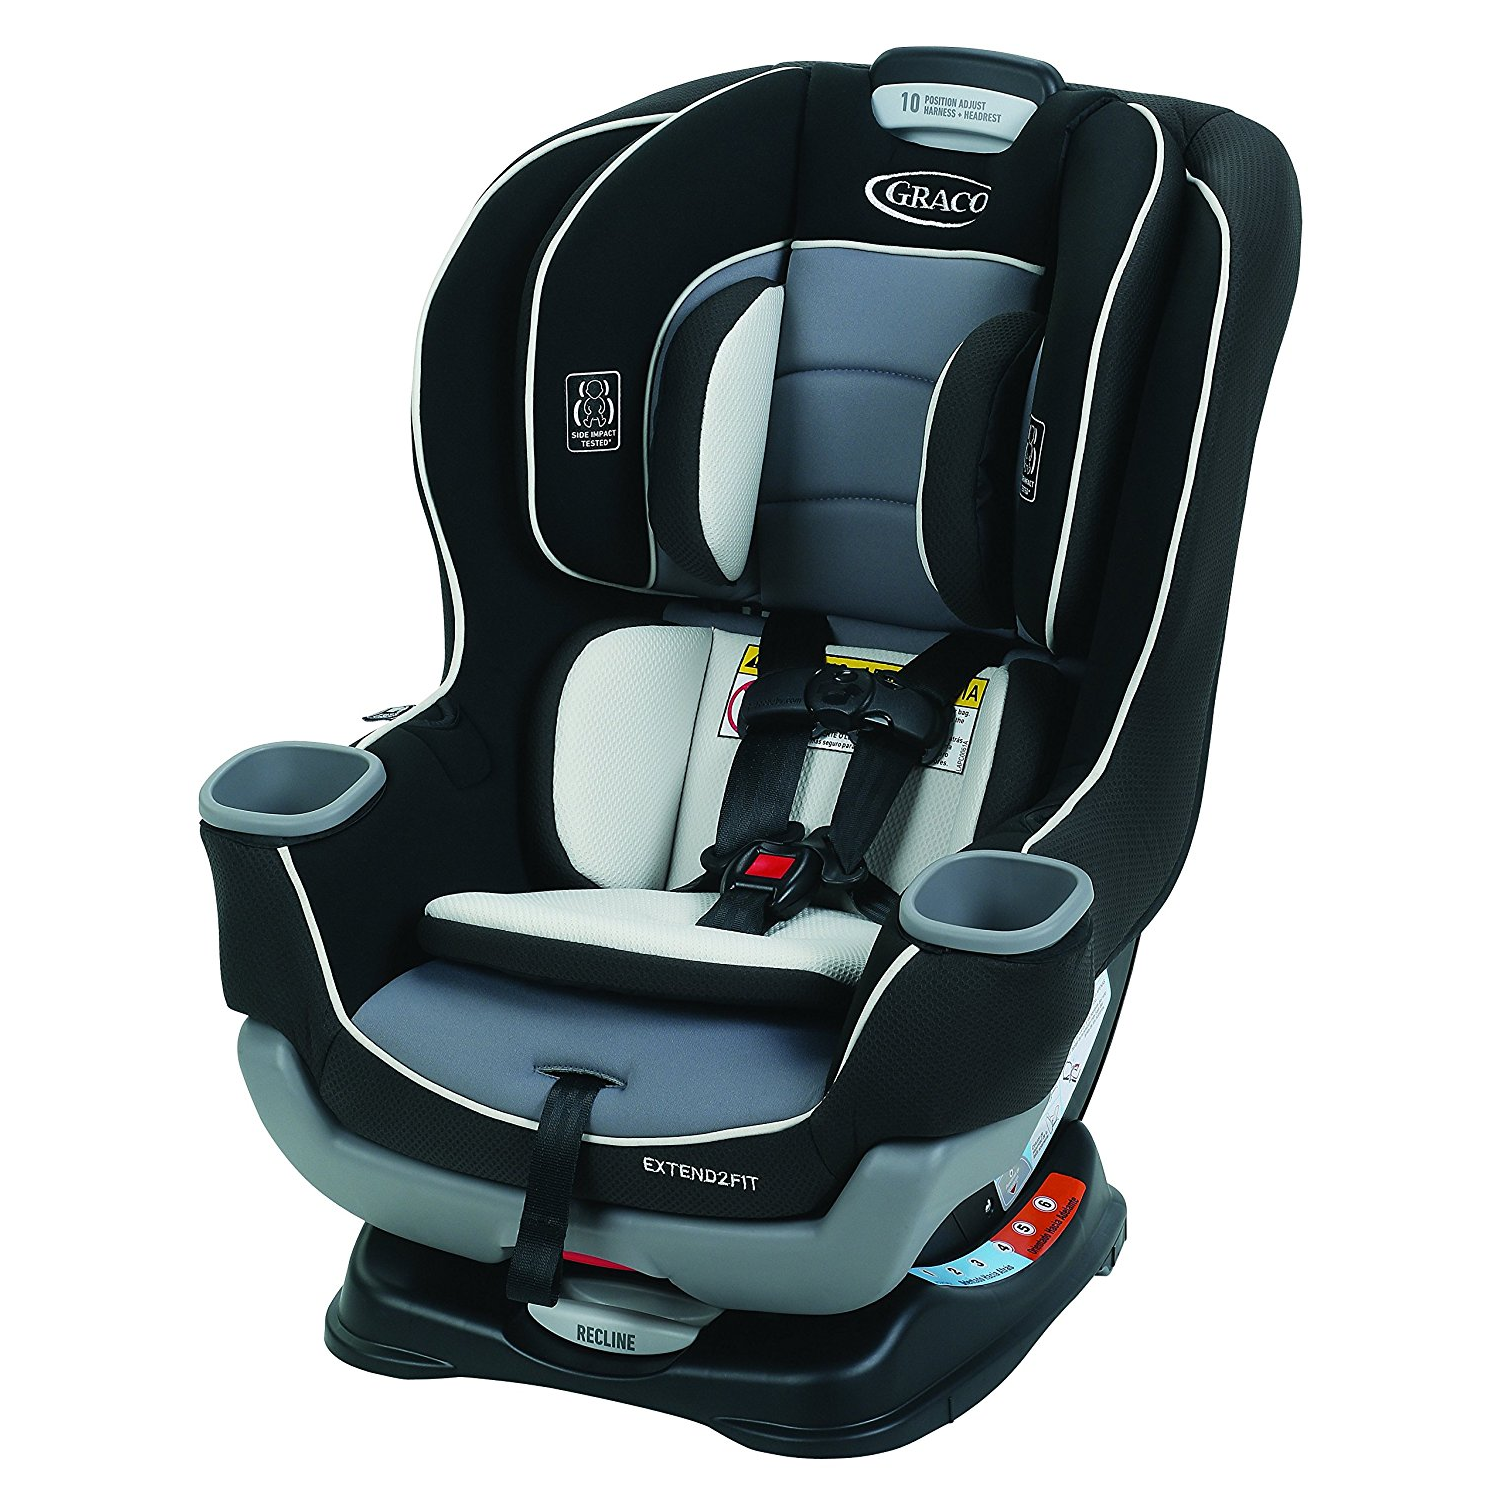 Graco Extend2Fit Convertible Car Seat Only $125.00! (Reg $199.99) #1 Best Seller & Highly Rated!